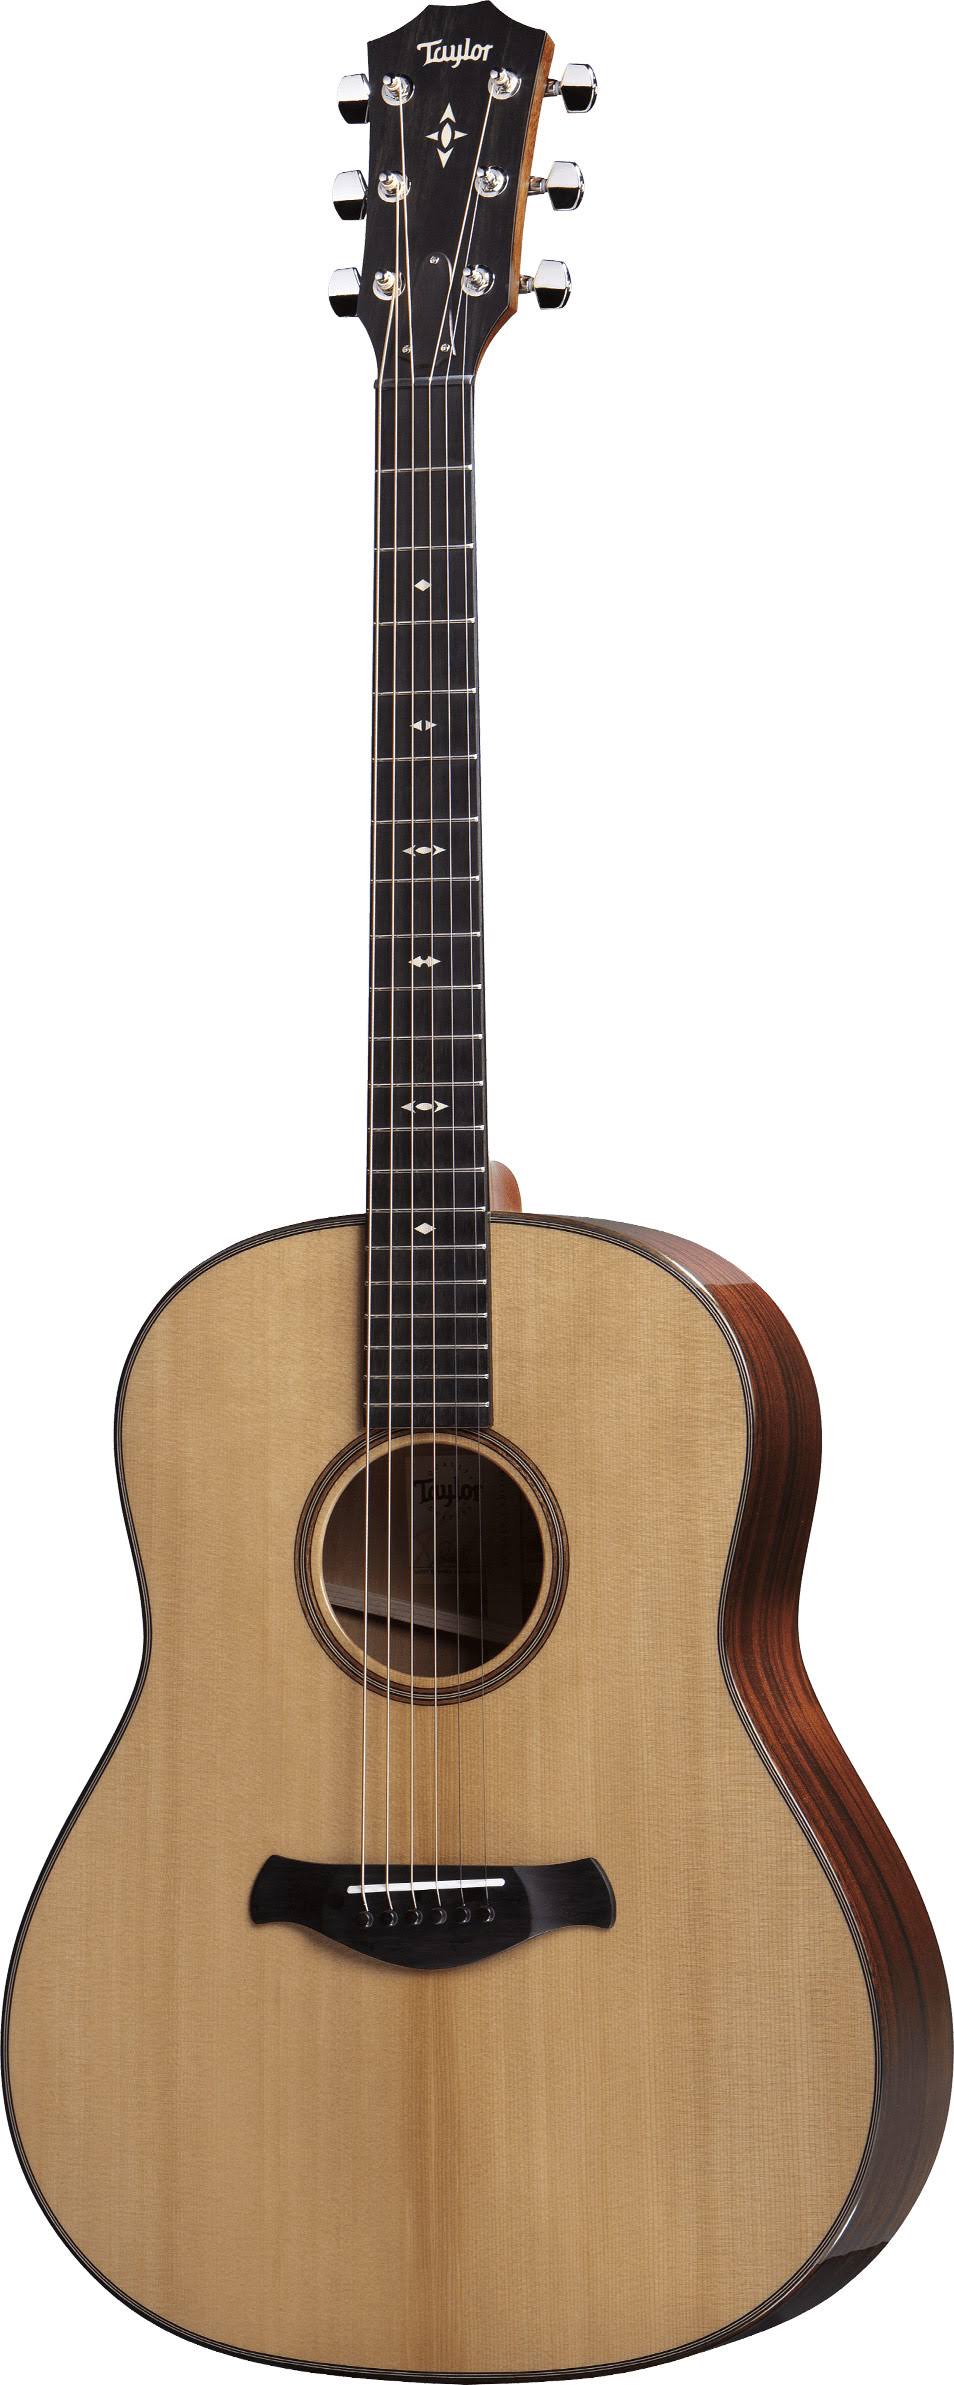 Taylor Builder's Edition 517 Grand Pacific Acoustic Guitar